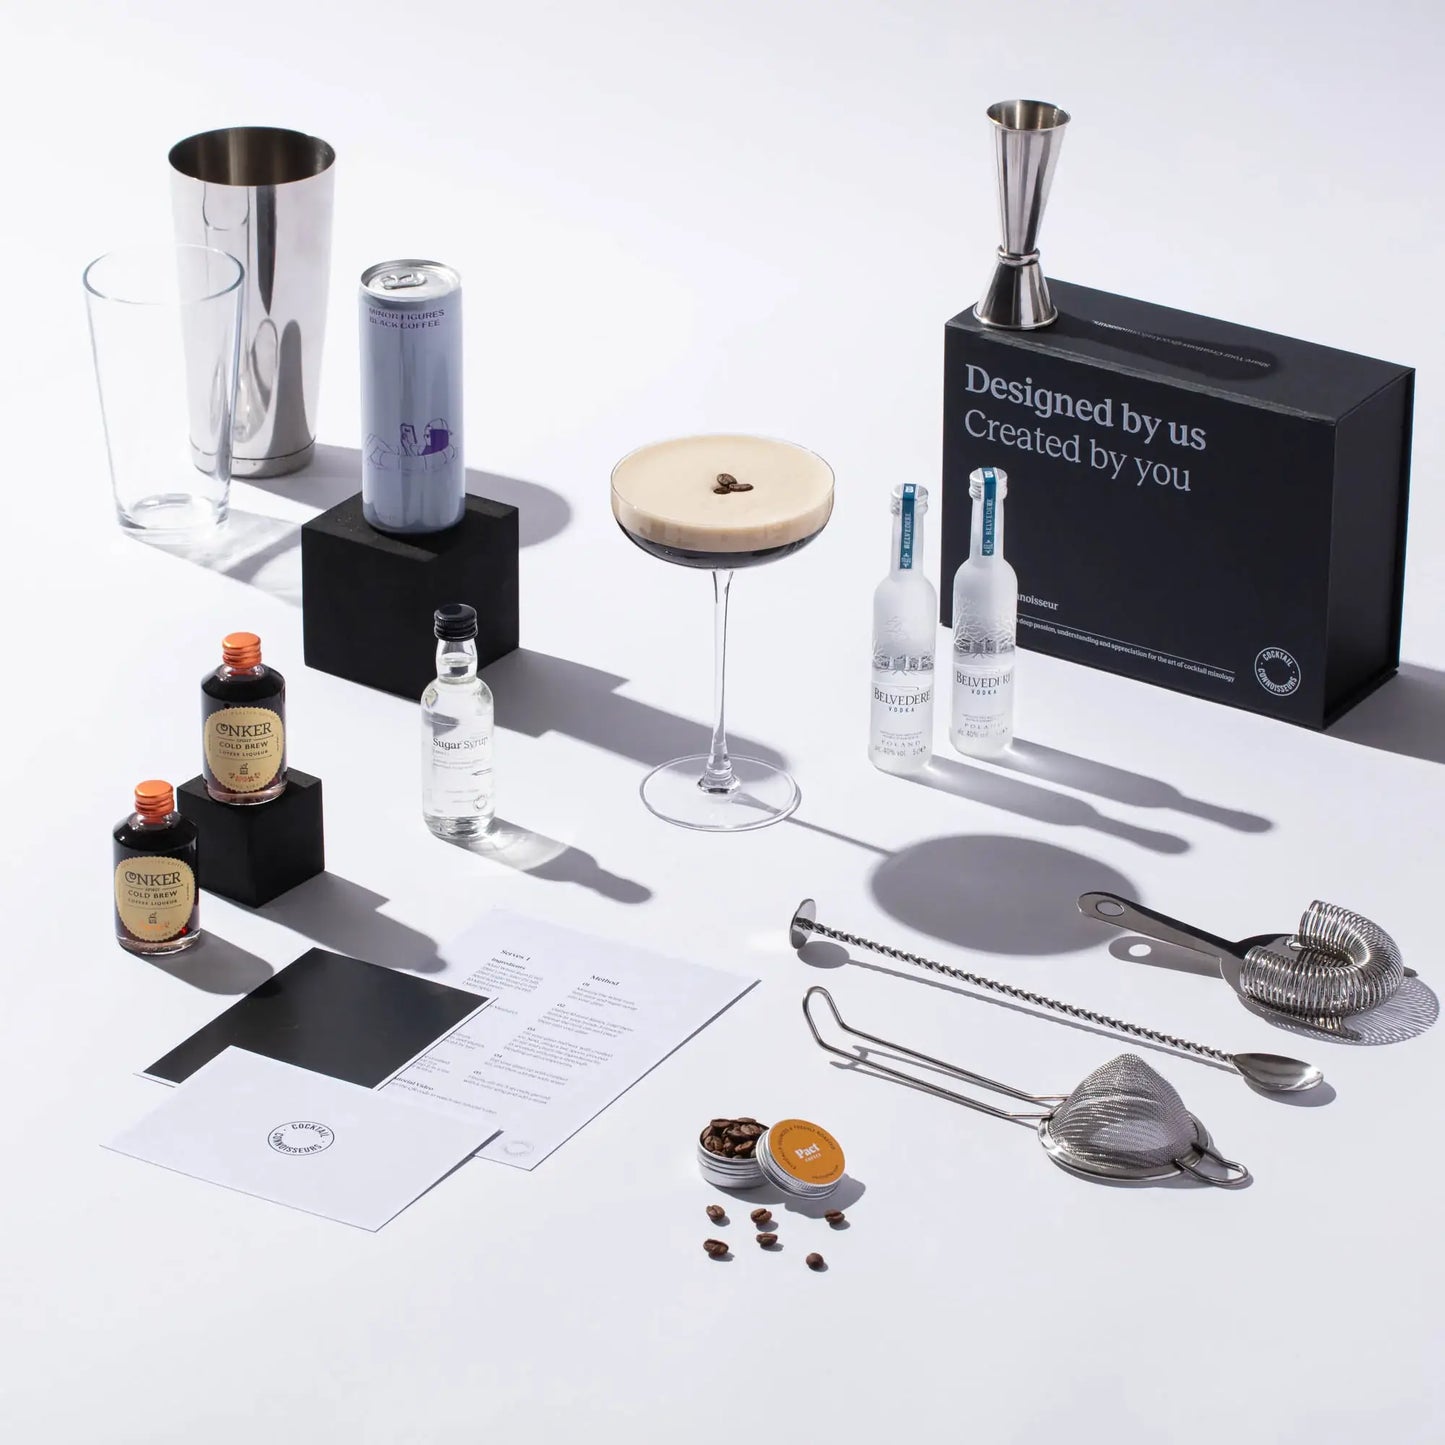 Espresso Martini cocktail kit gift set with advanced bar equipment in gift box